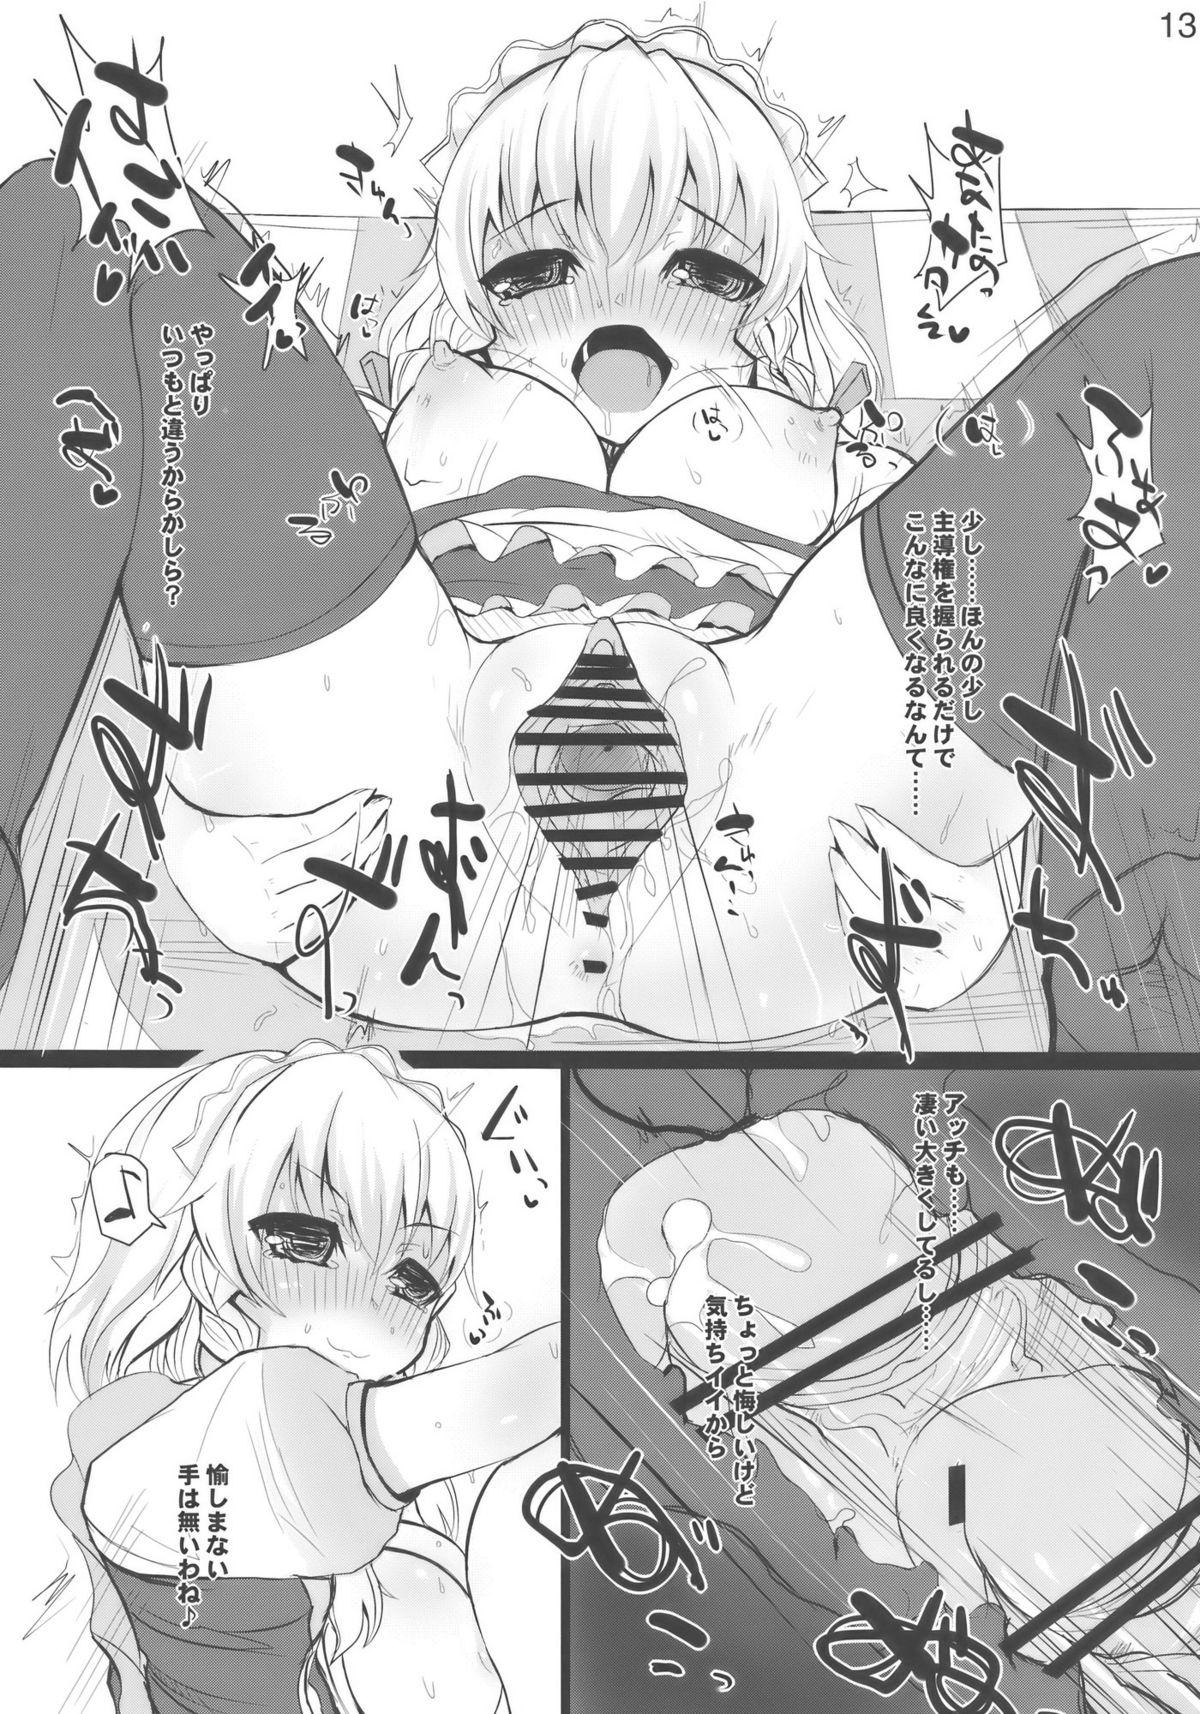 New Feed me with your Kiss - Touhou project Putinha - Page 13